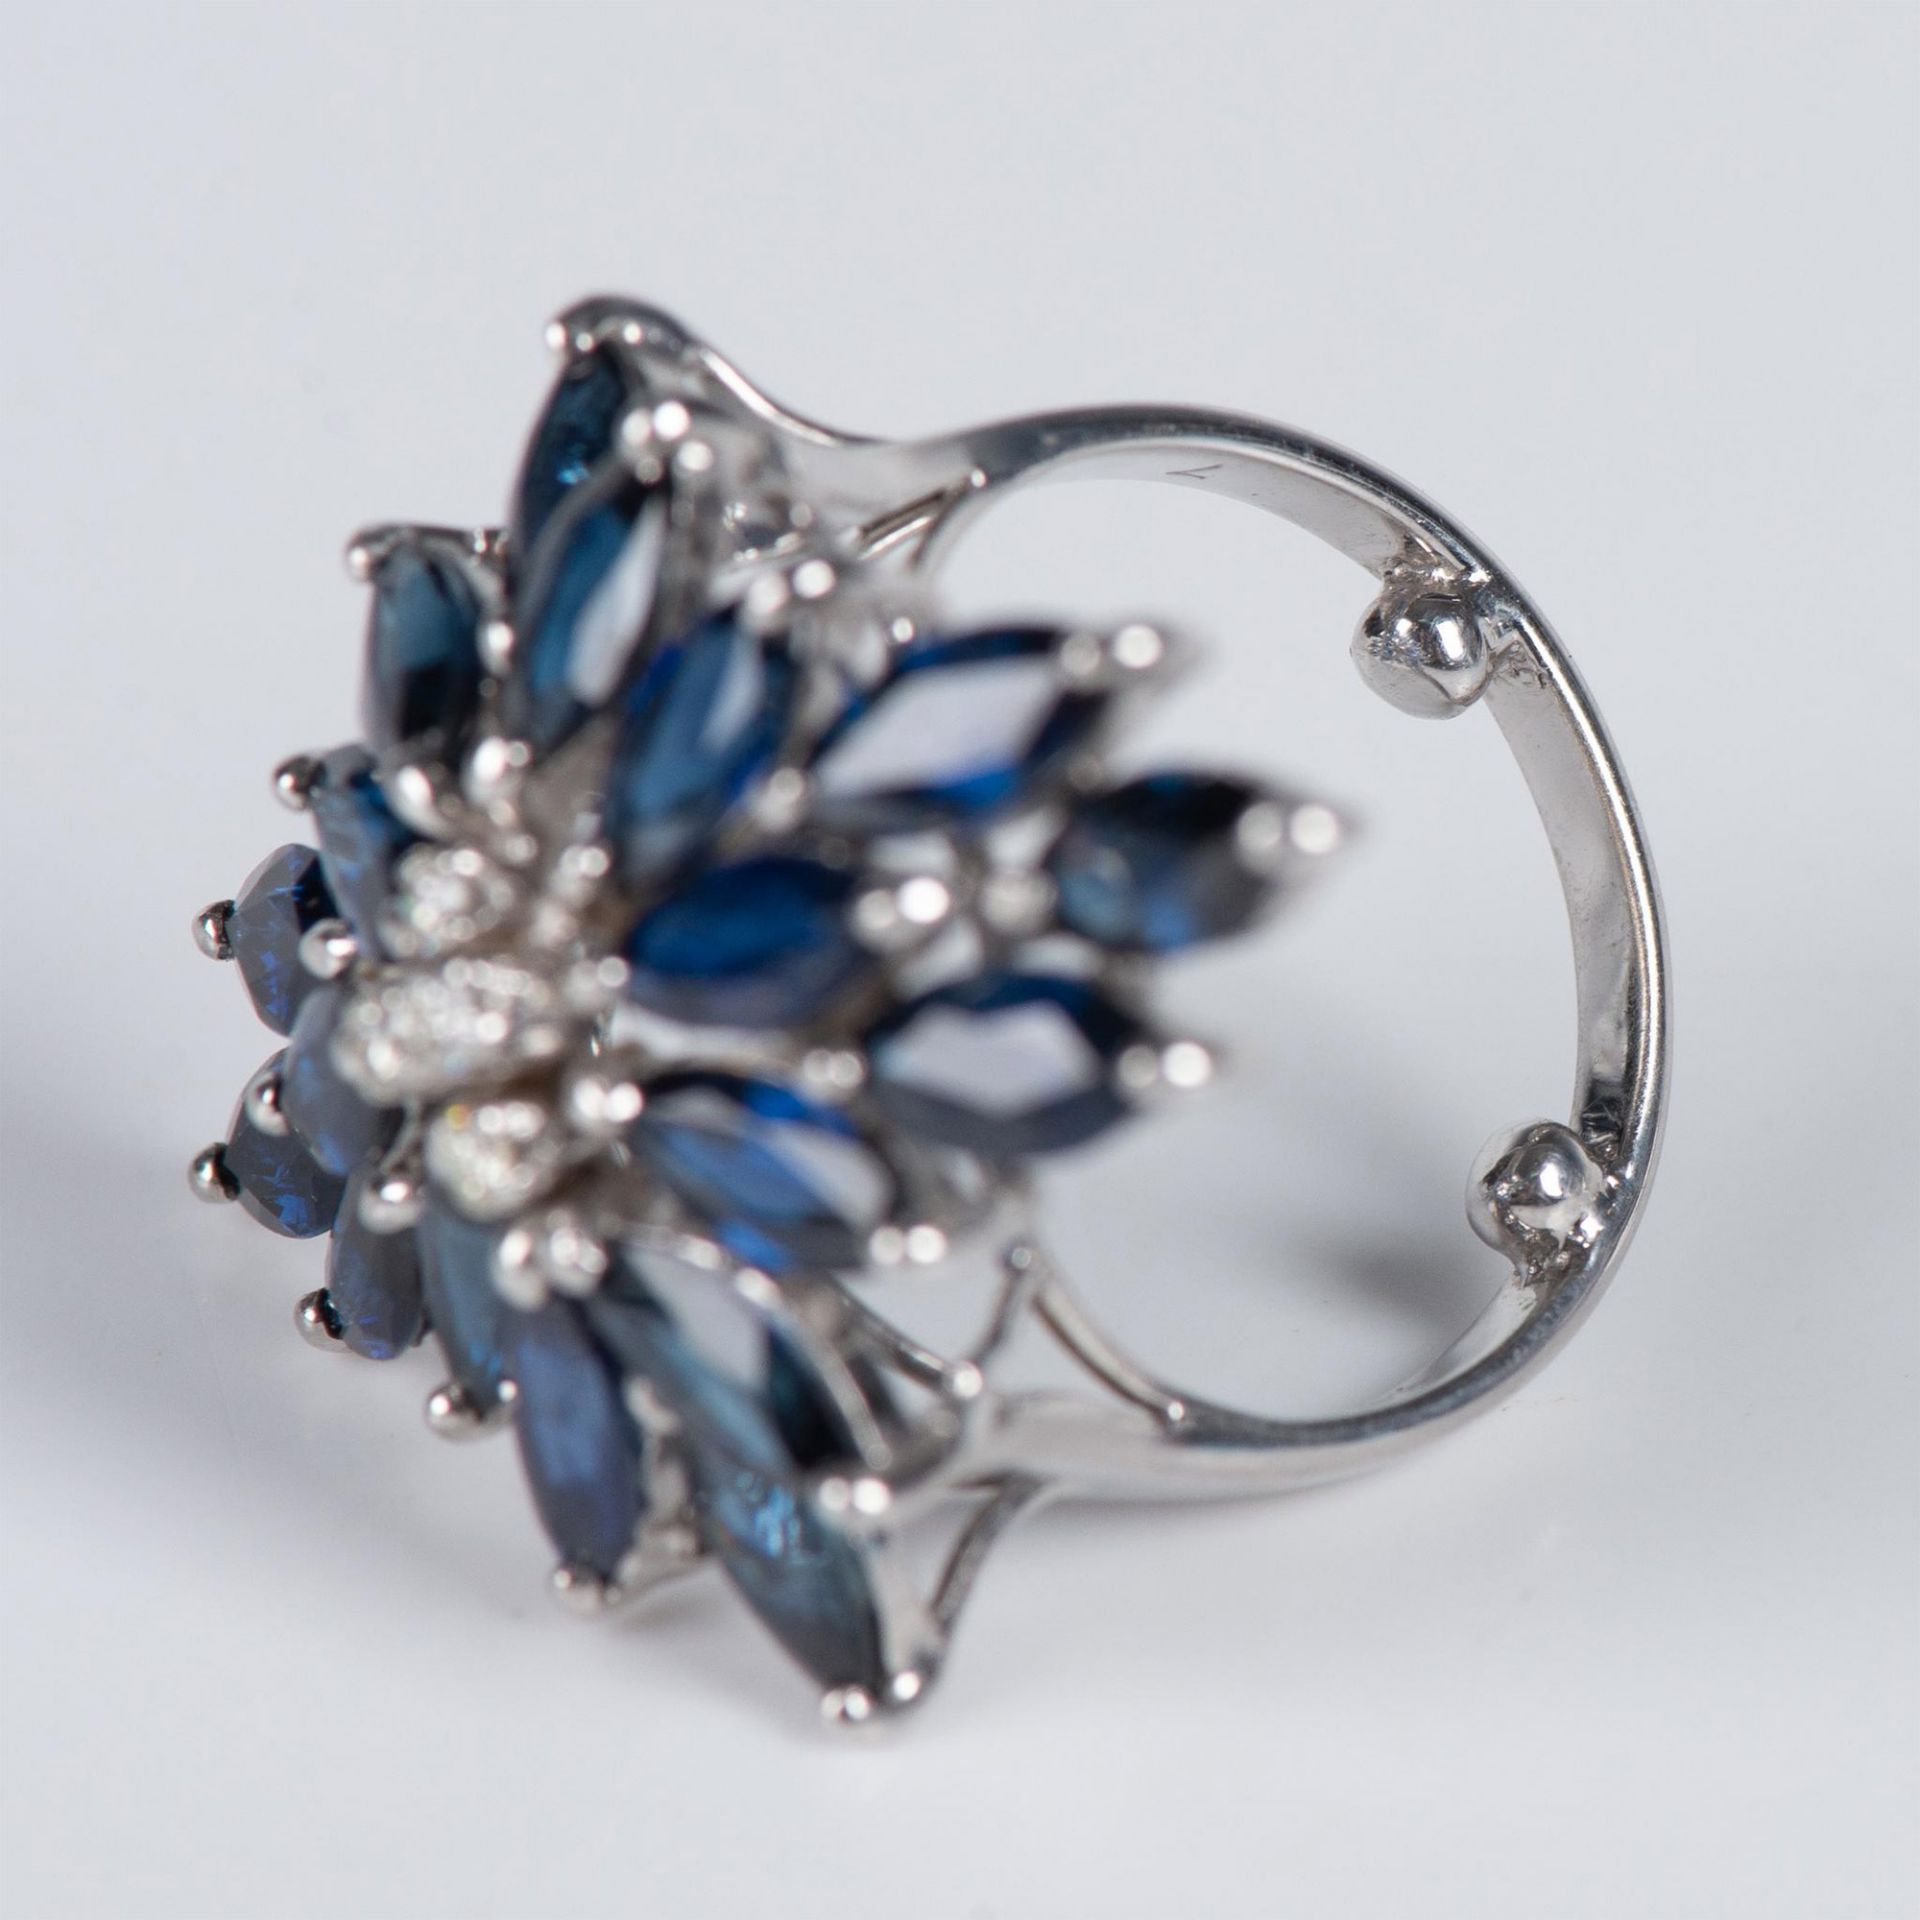 Fabulous 18k White Gold, Sapphire and Diamond Cocktail Ring - Image 4 of 7